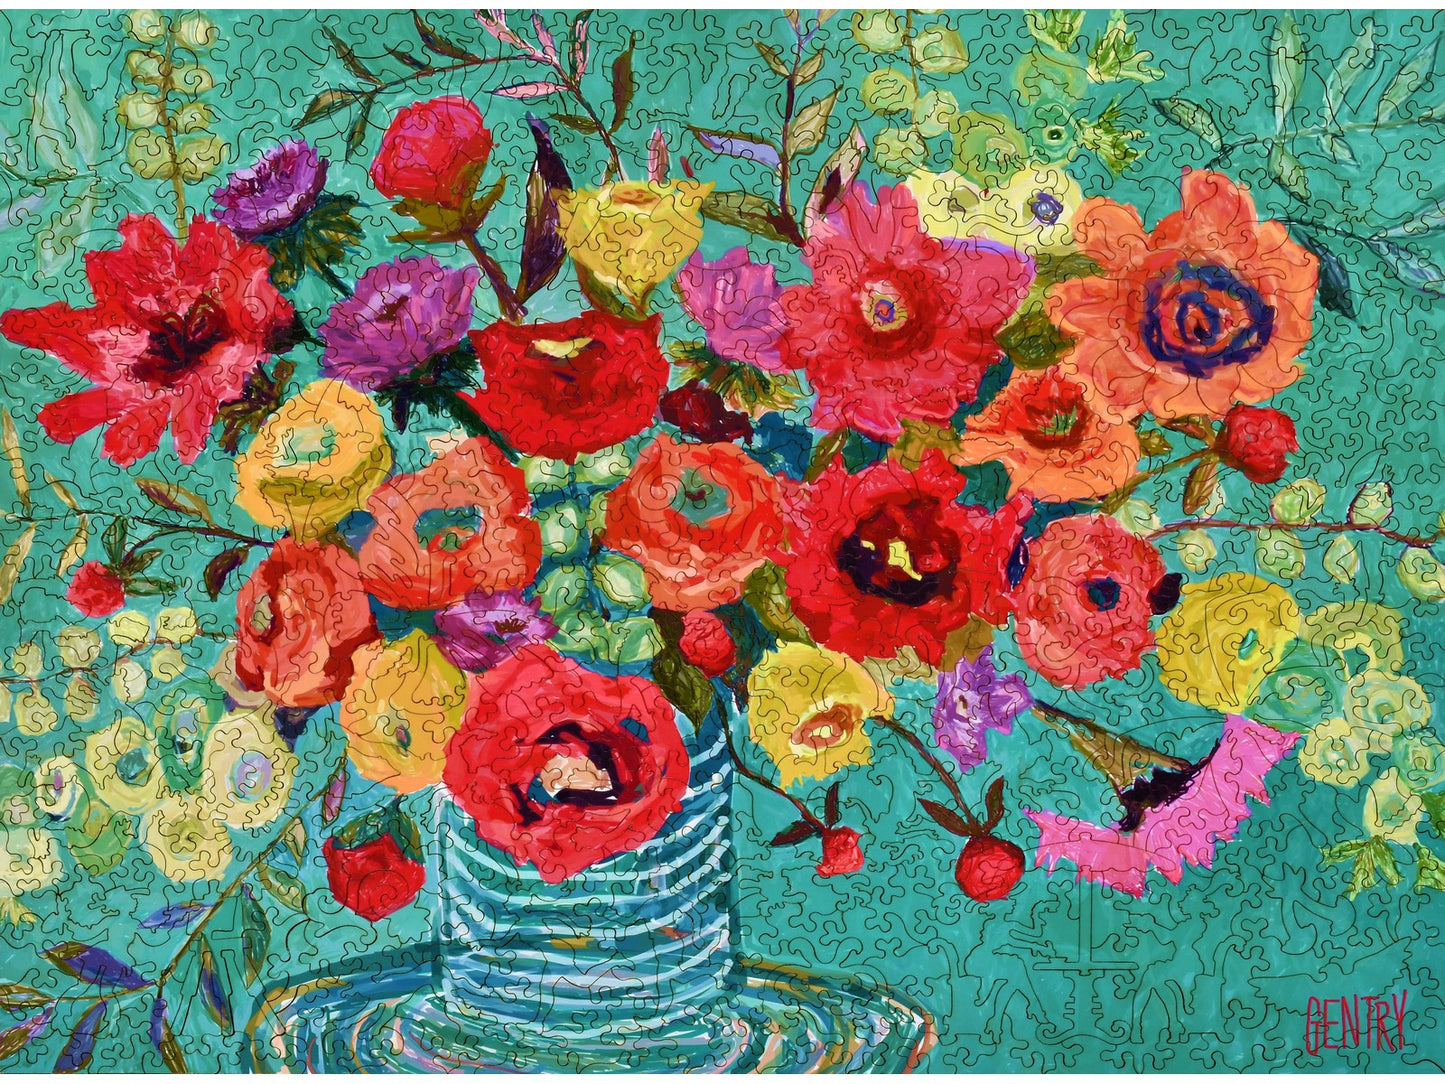 The front of the puzzle, Mel's Belles, which shows a vase of flowers.